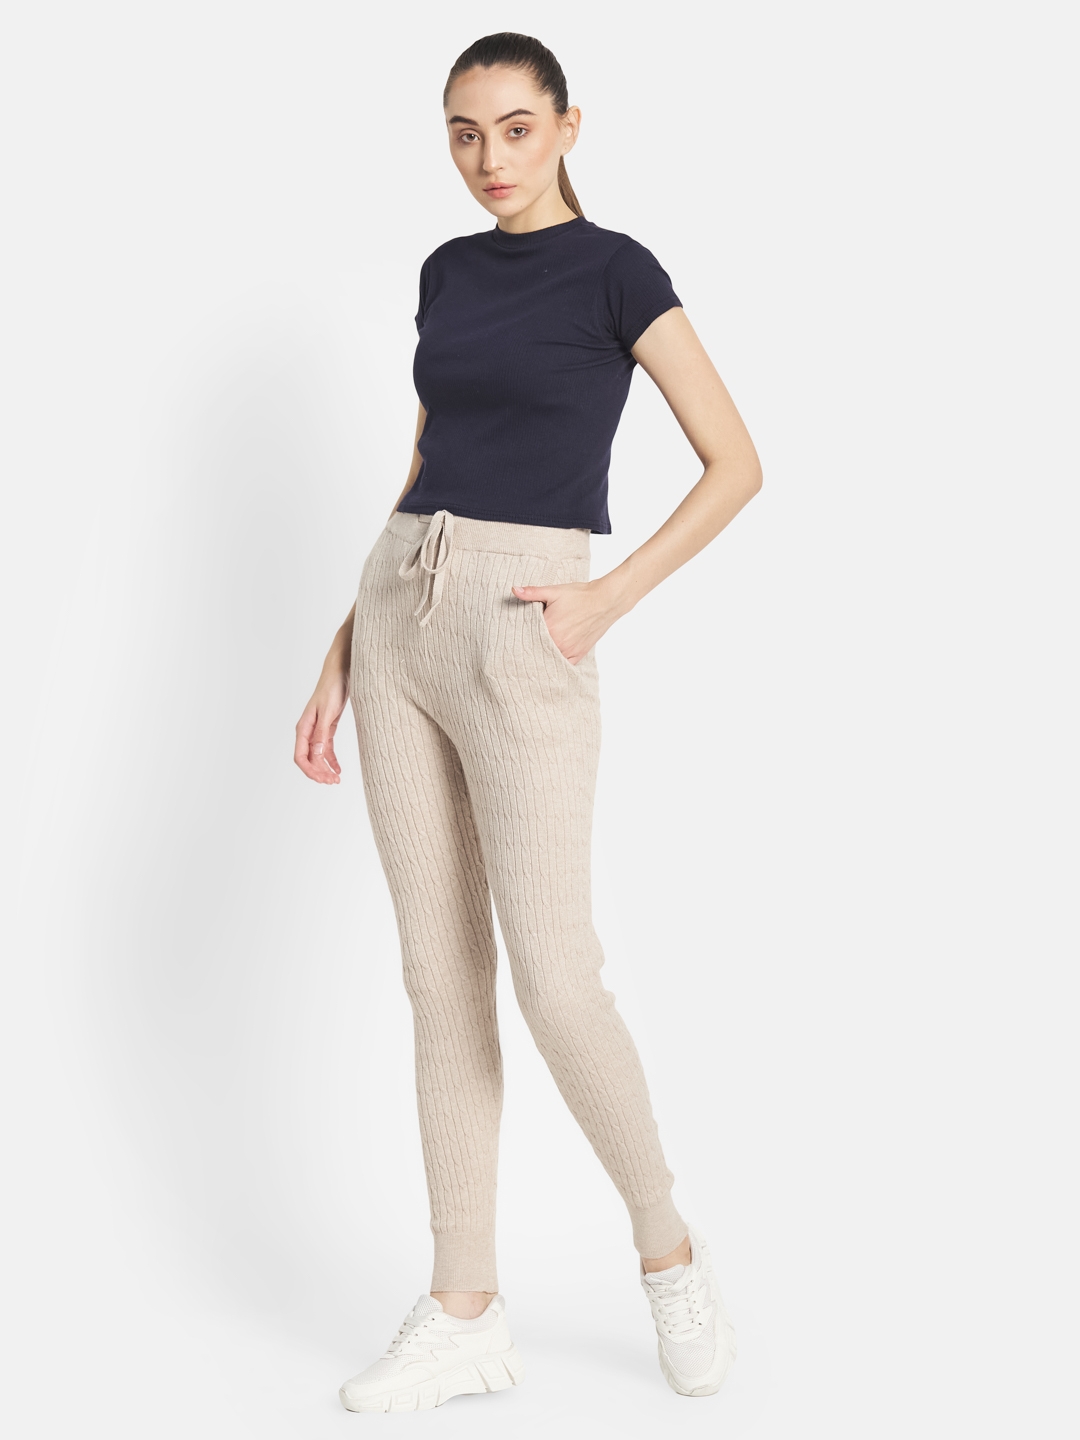 VISO The Face Purple Cotton Blend Solid Women Track Pants Price in India -  Buy VISO The Face Purple Cotton Blend Solid Women Track Pants online at  undefined